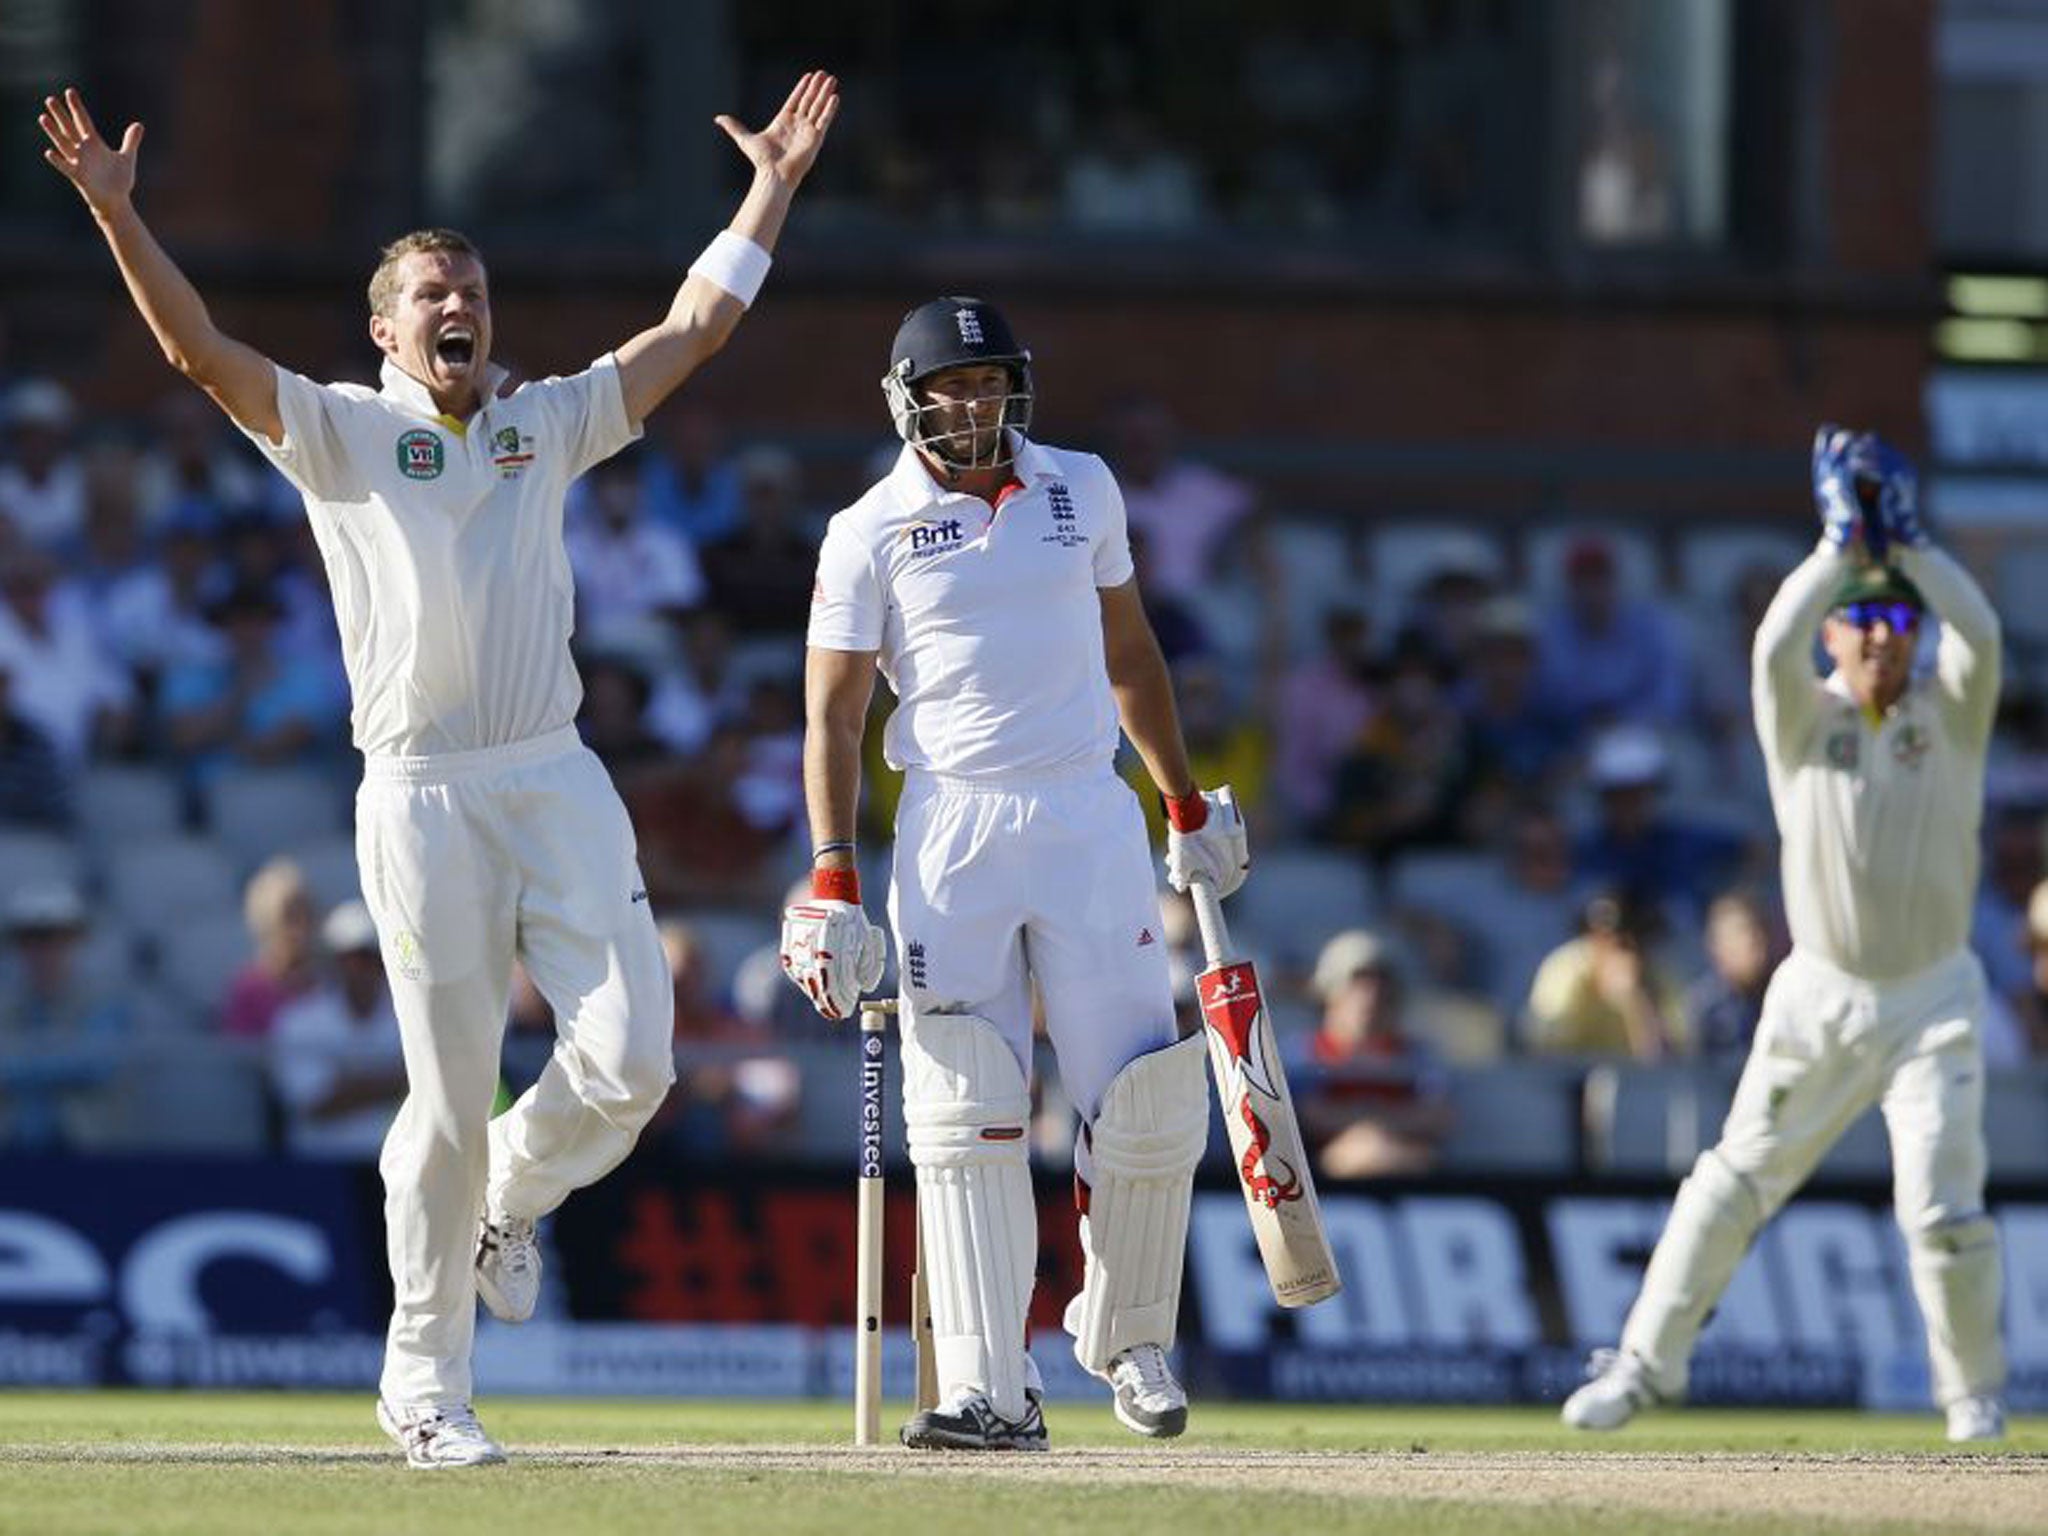 Peter Siddle appeals successfully for the wicket of Tim Bresnan late in the day